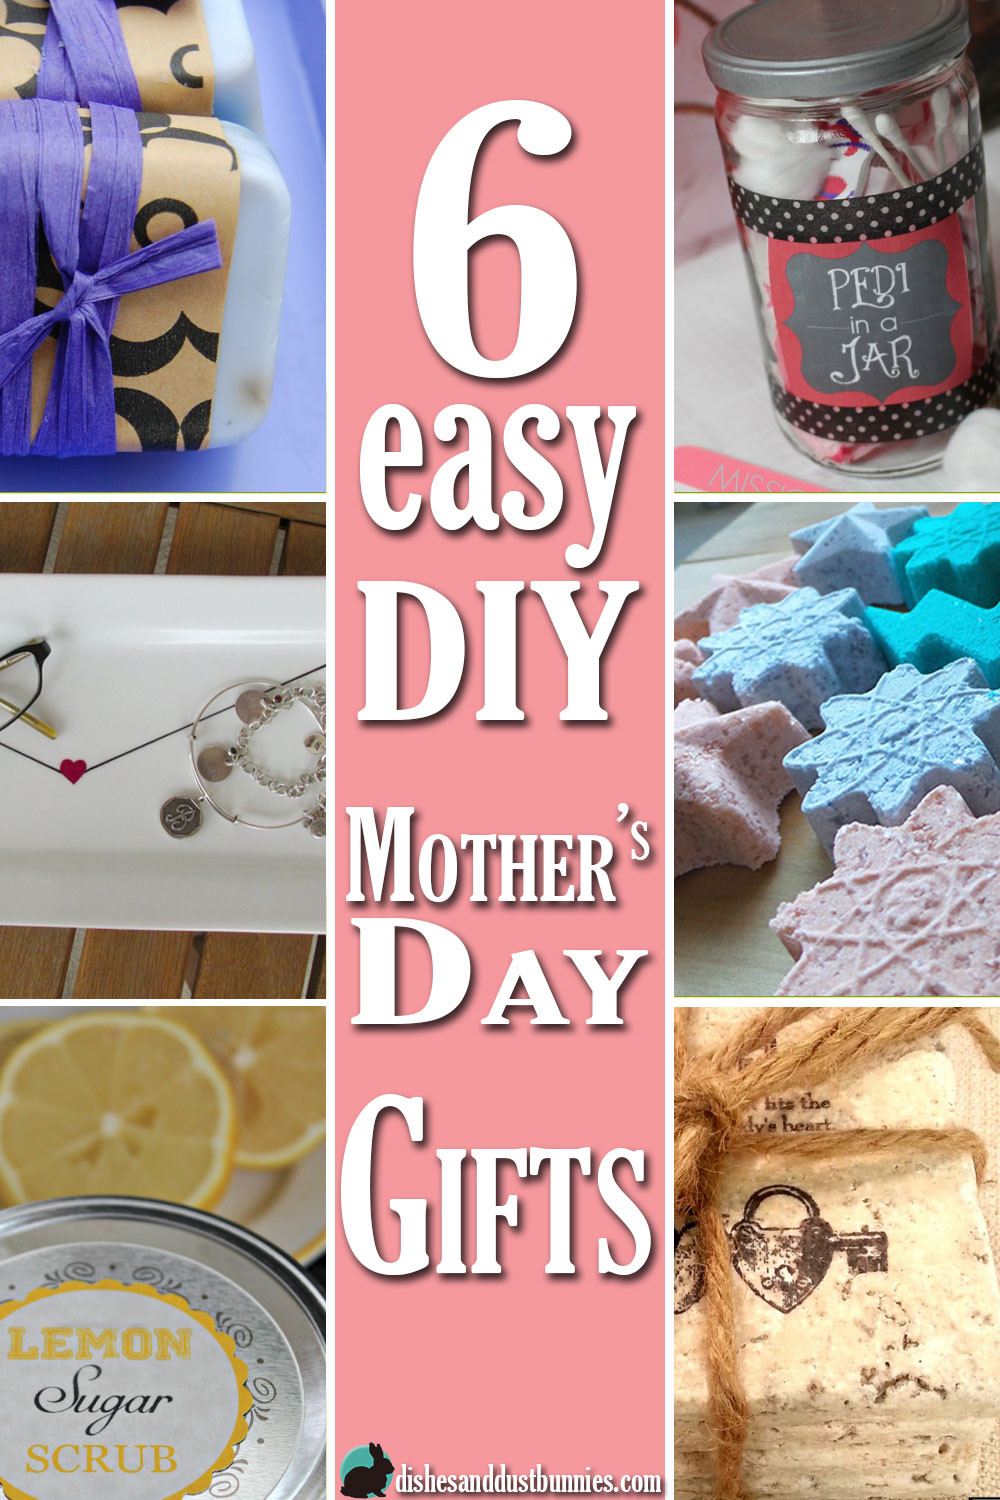 Easy DIY Mothers Day Gifts
 6 Easy DIY Mother s Day Gifts Dishes and Dust Bunnies